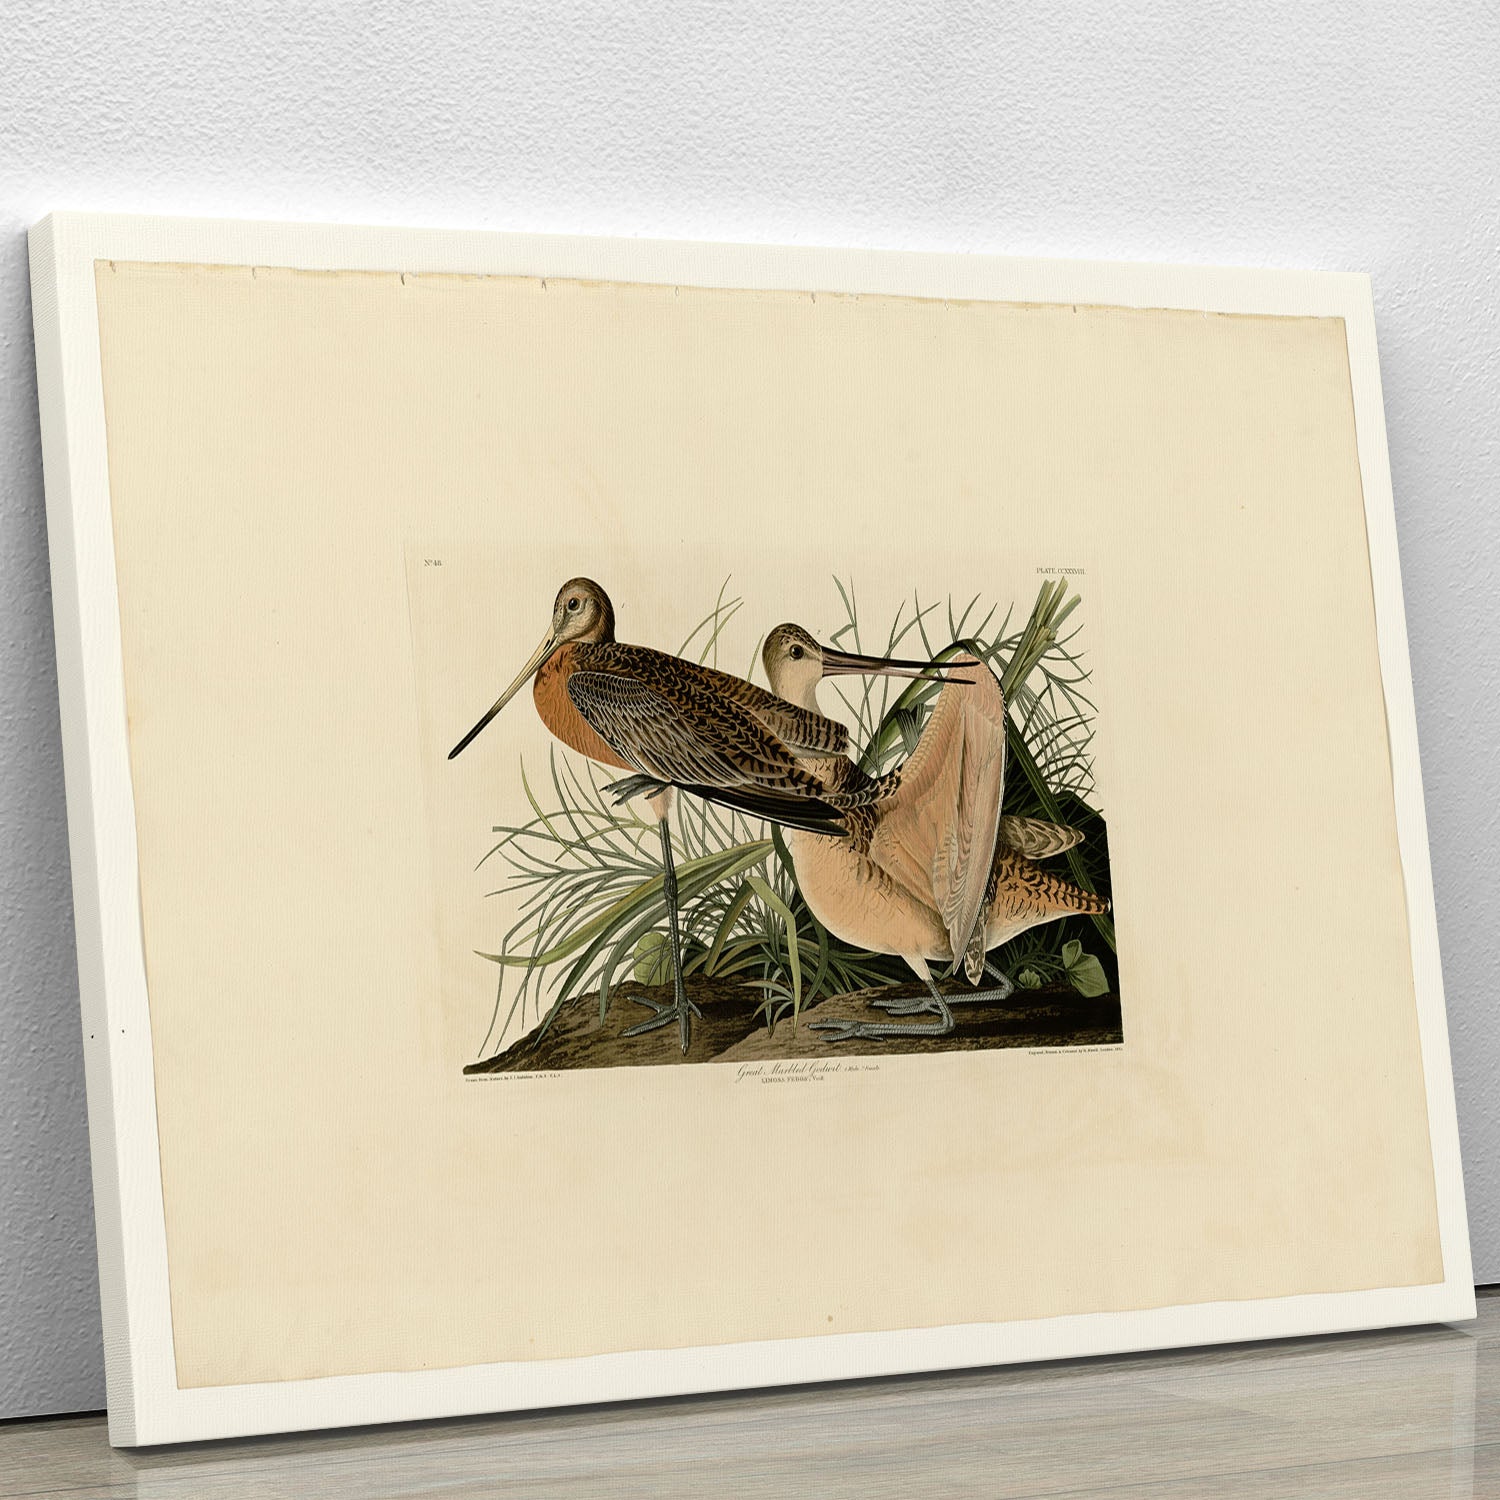 Great Marbled Godwit by Audubon Canvas Print or Poster - Canvas Art Rocks - 1